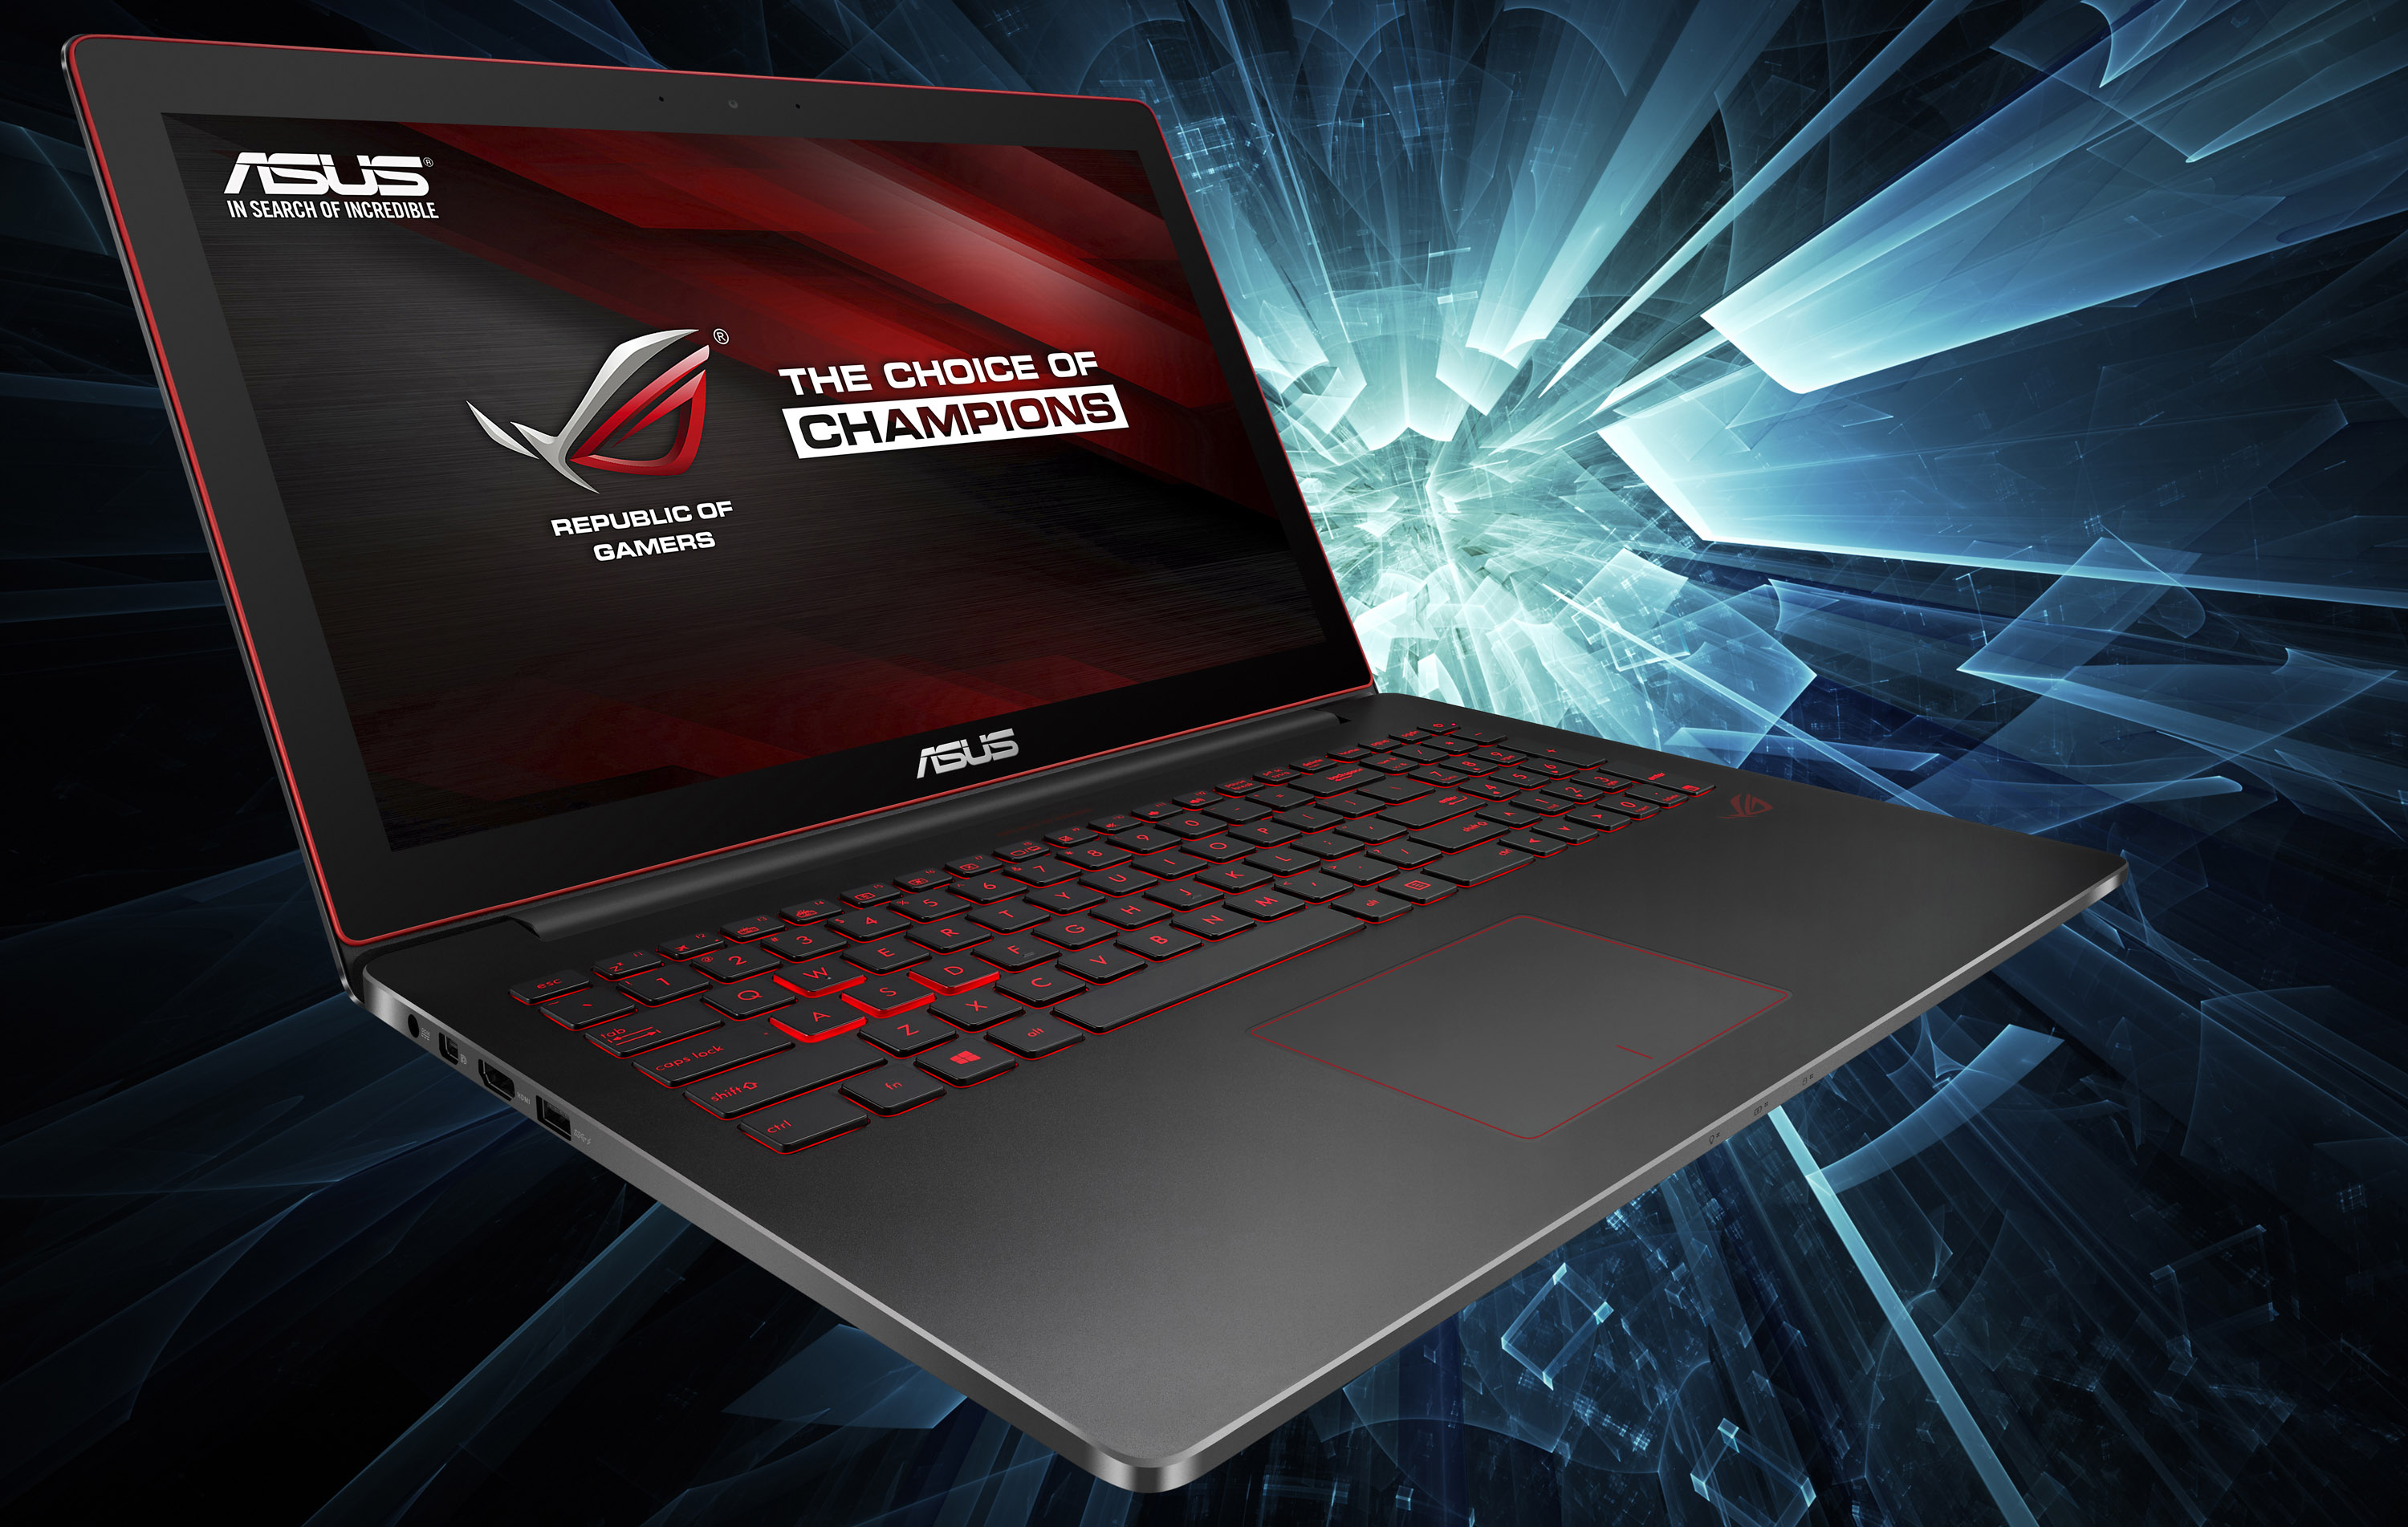 Nvidia Geforce Gtx 960m 950m And 940m In Asus Acer And Lenovo Notebooks Videocardz Com